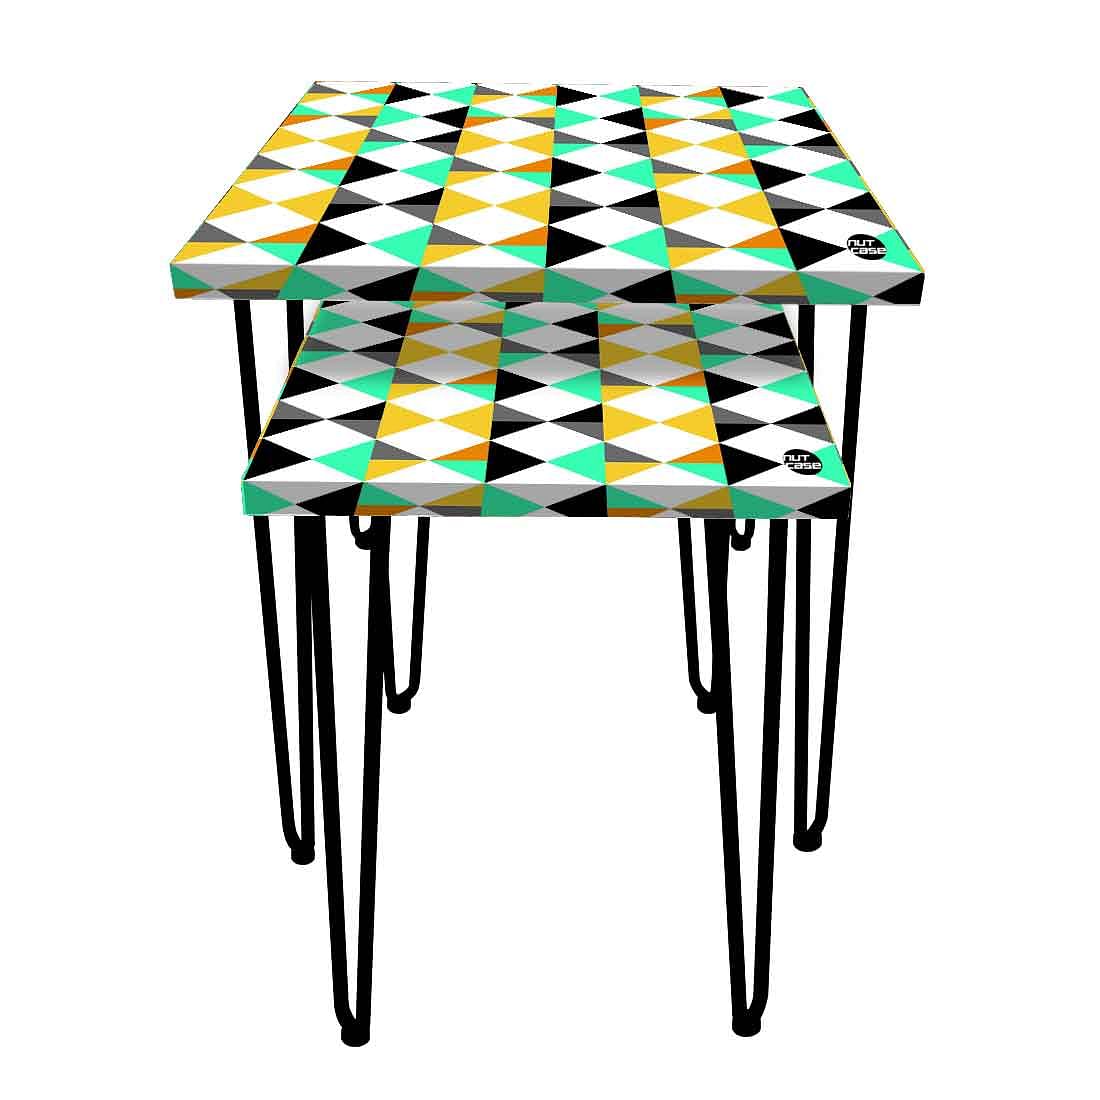 Designer Nesting Tables for Home & Office Set of 2 - Colorful Diamond Nutcase